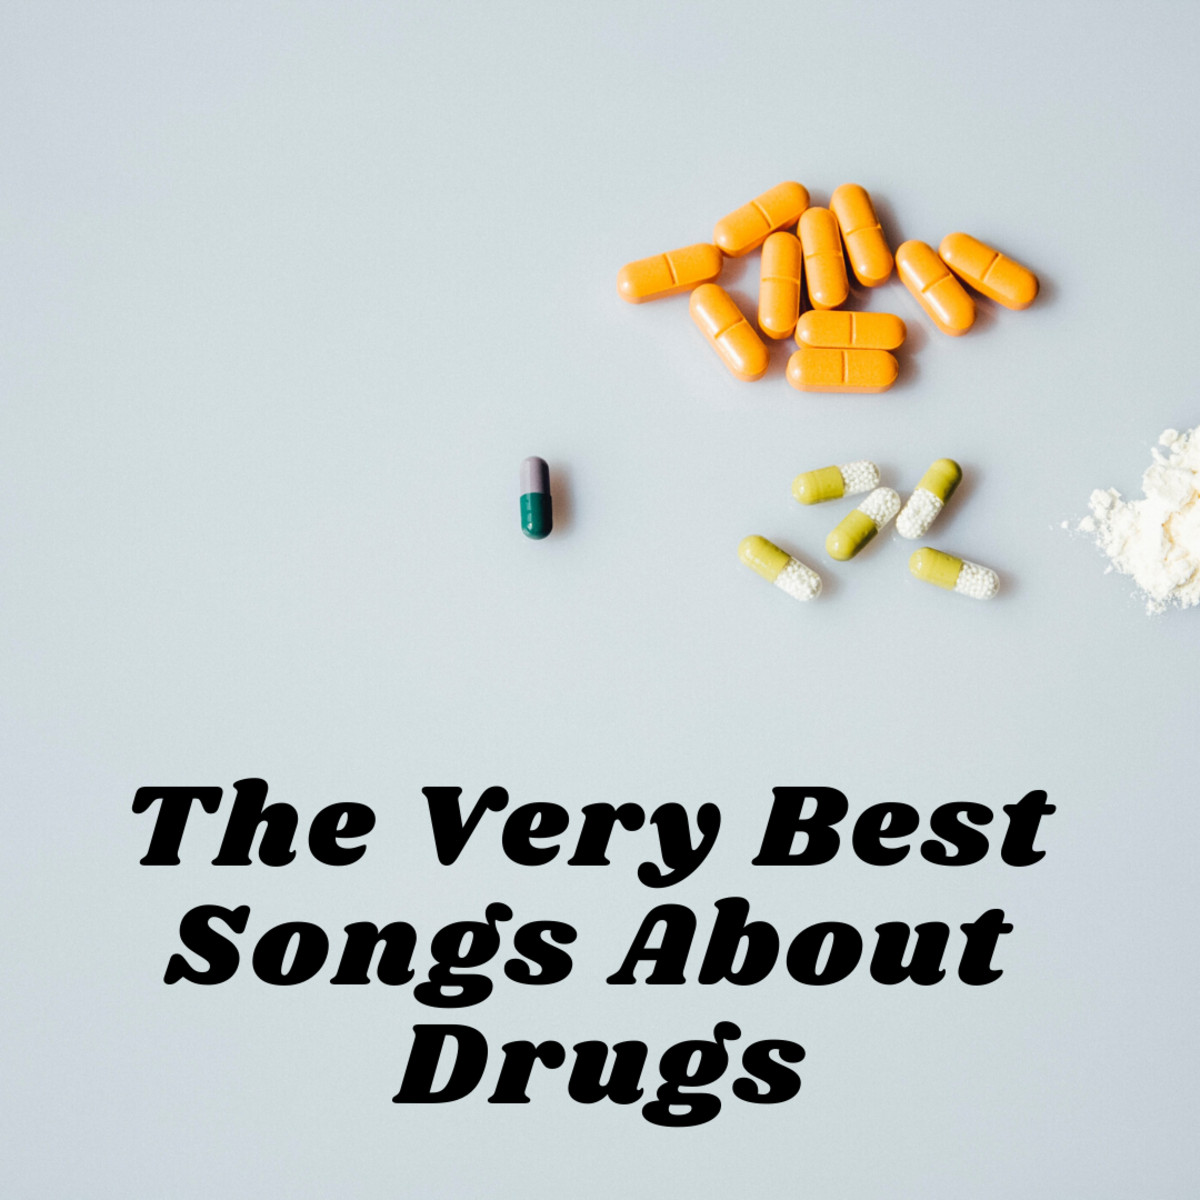 15 Best Songs About Drugs